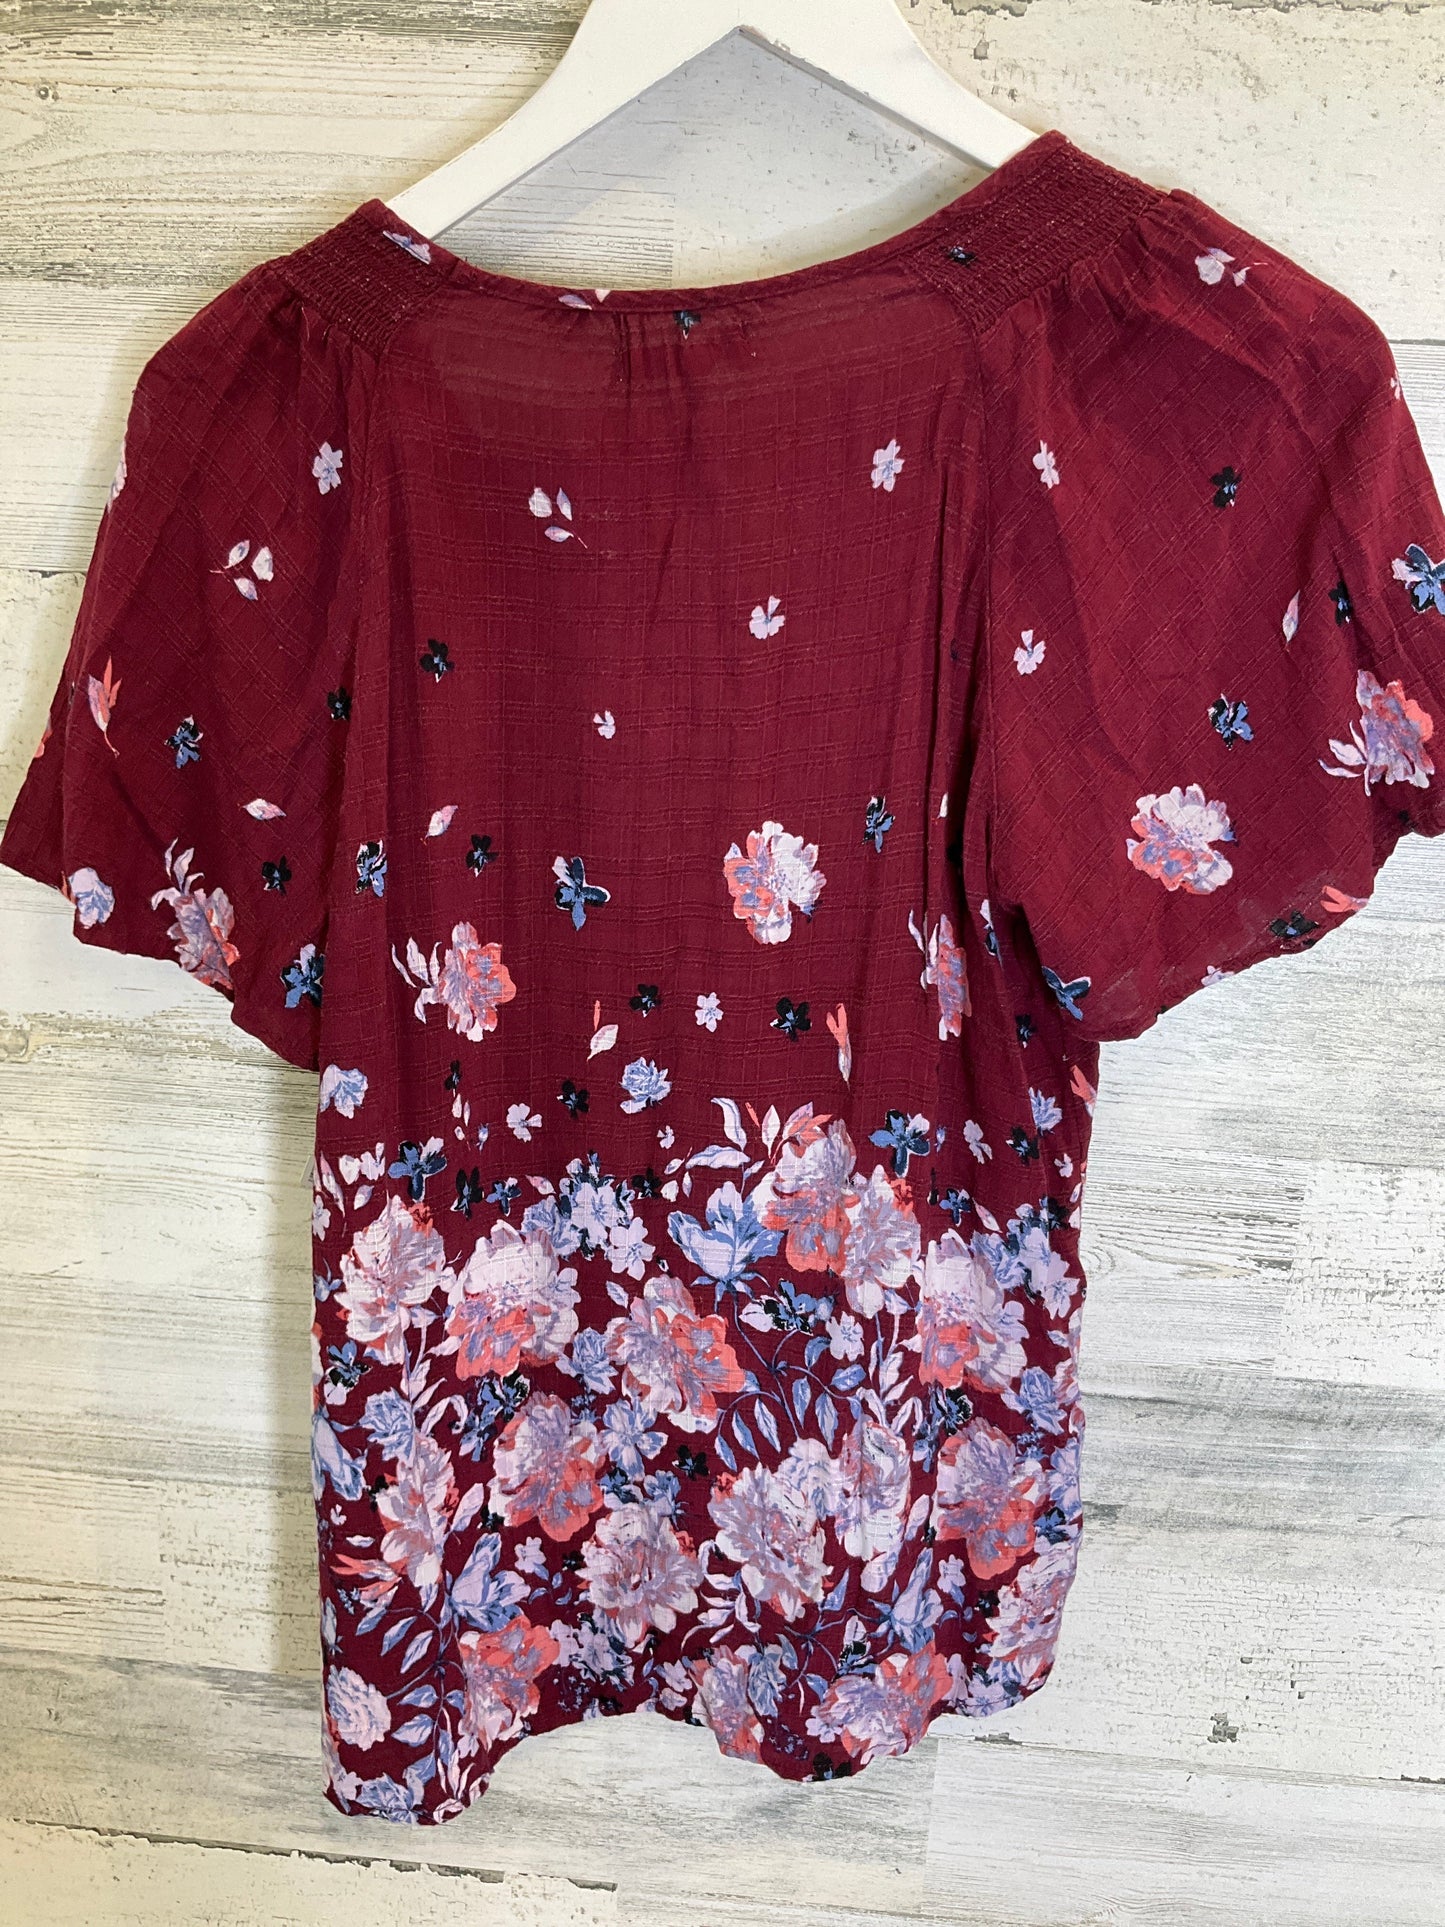 Red Top Short Sleeve Maurices, Size M